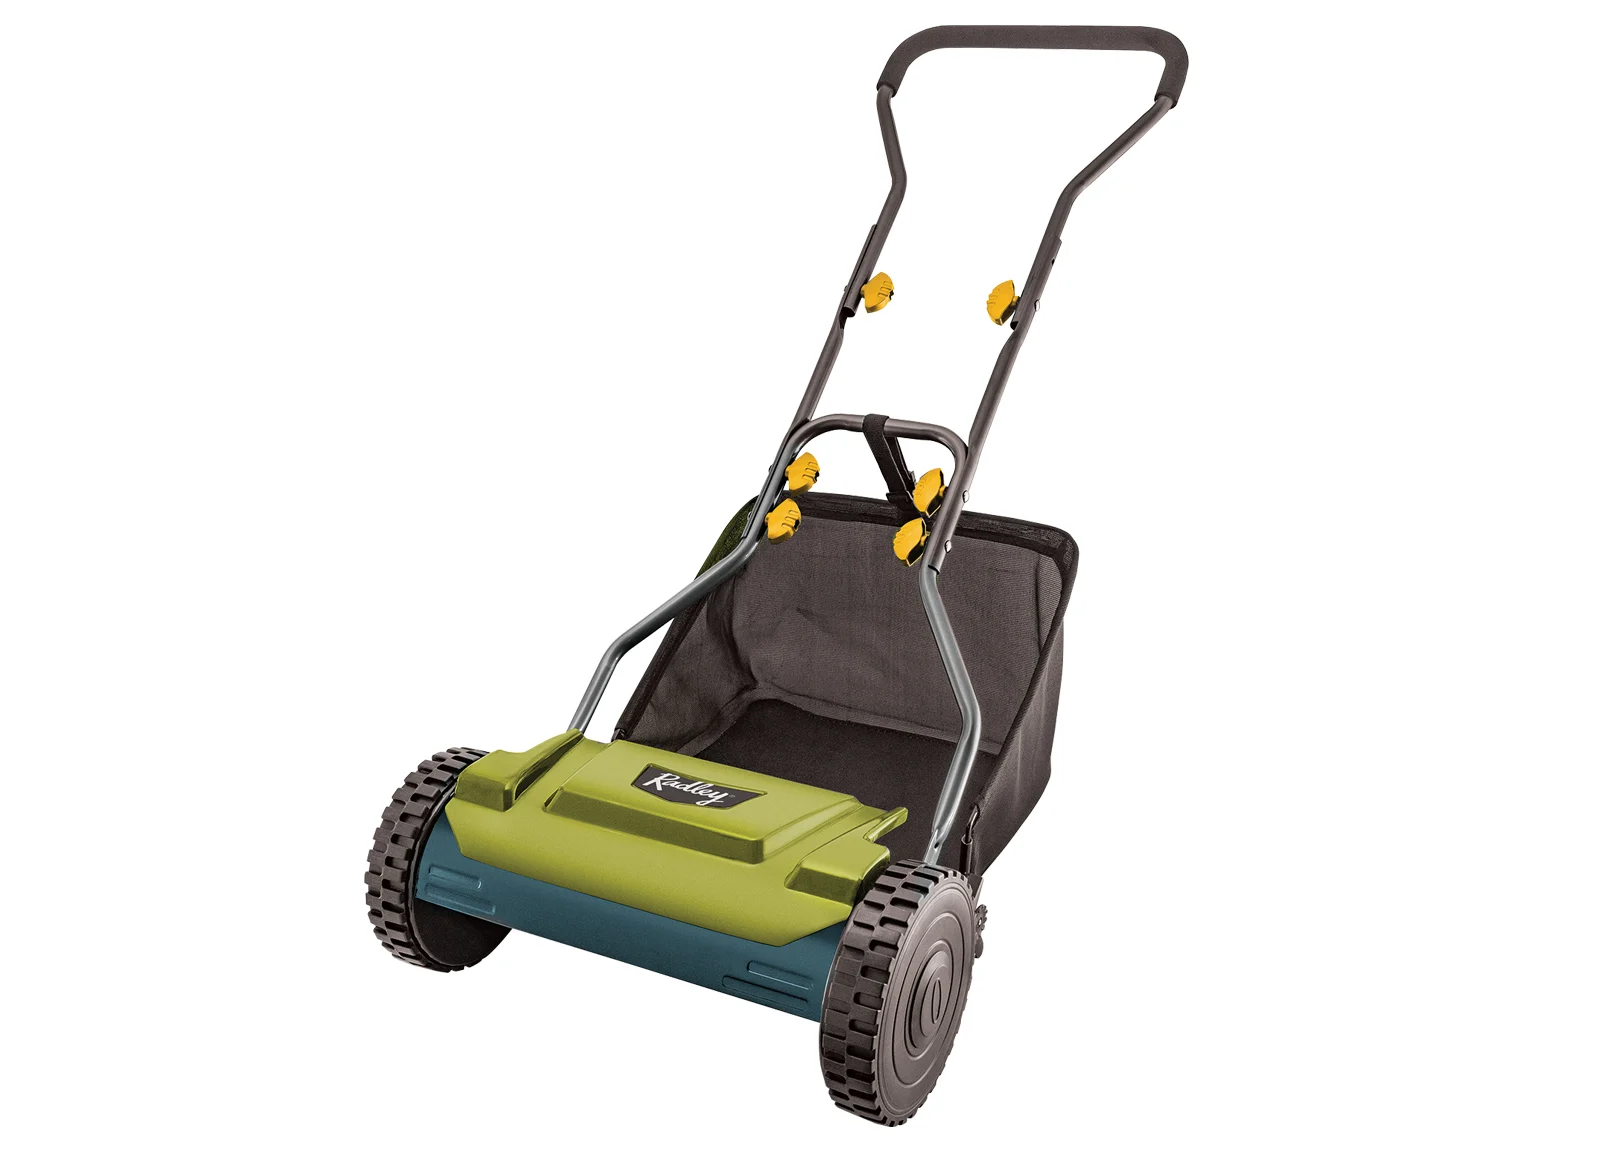 Lawn Mowers: Electric, Self Propelled, Gas & Cordless